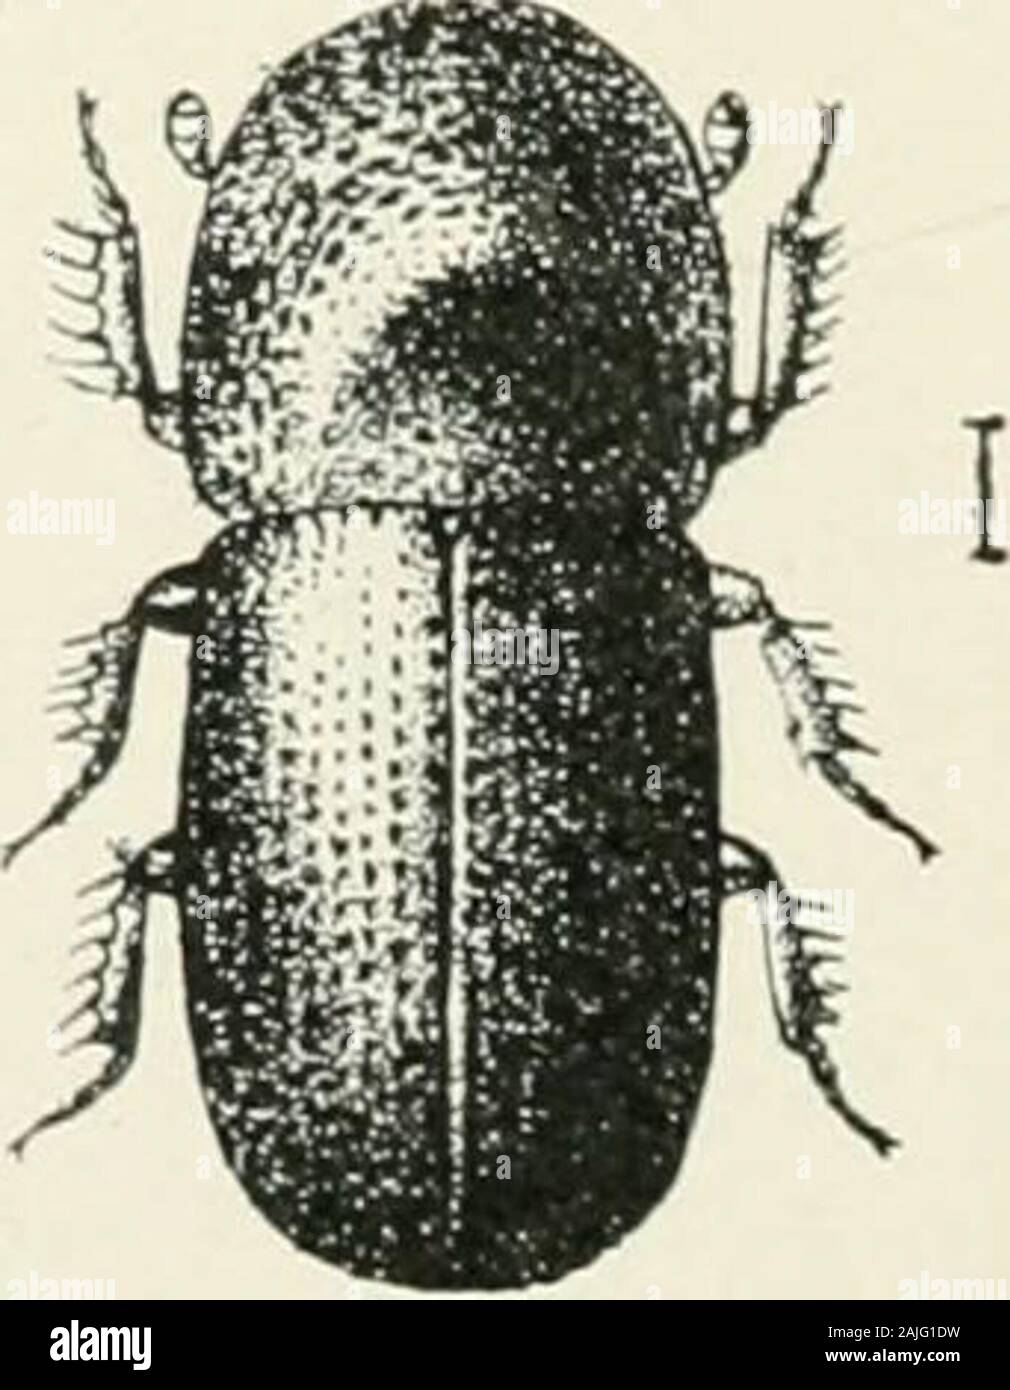 Indian forest insects of economic importance Coleoptera . FIG. 378. Xyleborus noxius, Samps., sp. nov., in Dal- bcrgia ciiltrata. Salween River, Tenasserim. FIG. 379. Xyleborus no.rius, Samps., in pyinkadu. Tenasserim. FIG. 380. XvlcborusSamps., in teak.Nilumbur, SouthMalabar. Scutellum round, large, smooth. Elytra about as wide as thorax at base, not halfagain ; punctate, the punctures circular, shallow, rather large, the interspaces smooth, FAMILY SCOLYTIDAE 599 with a very fine row of small punctures down them ; declivity only moderately abrupt, striate-punctate, with a moderately dense cov Stock Photo